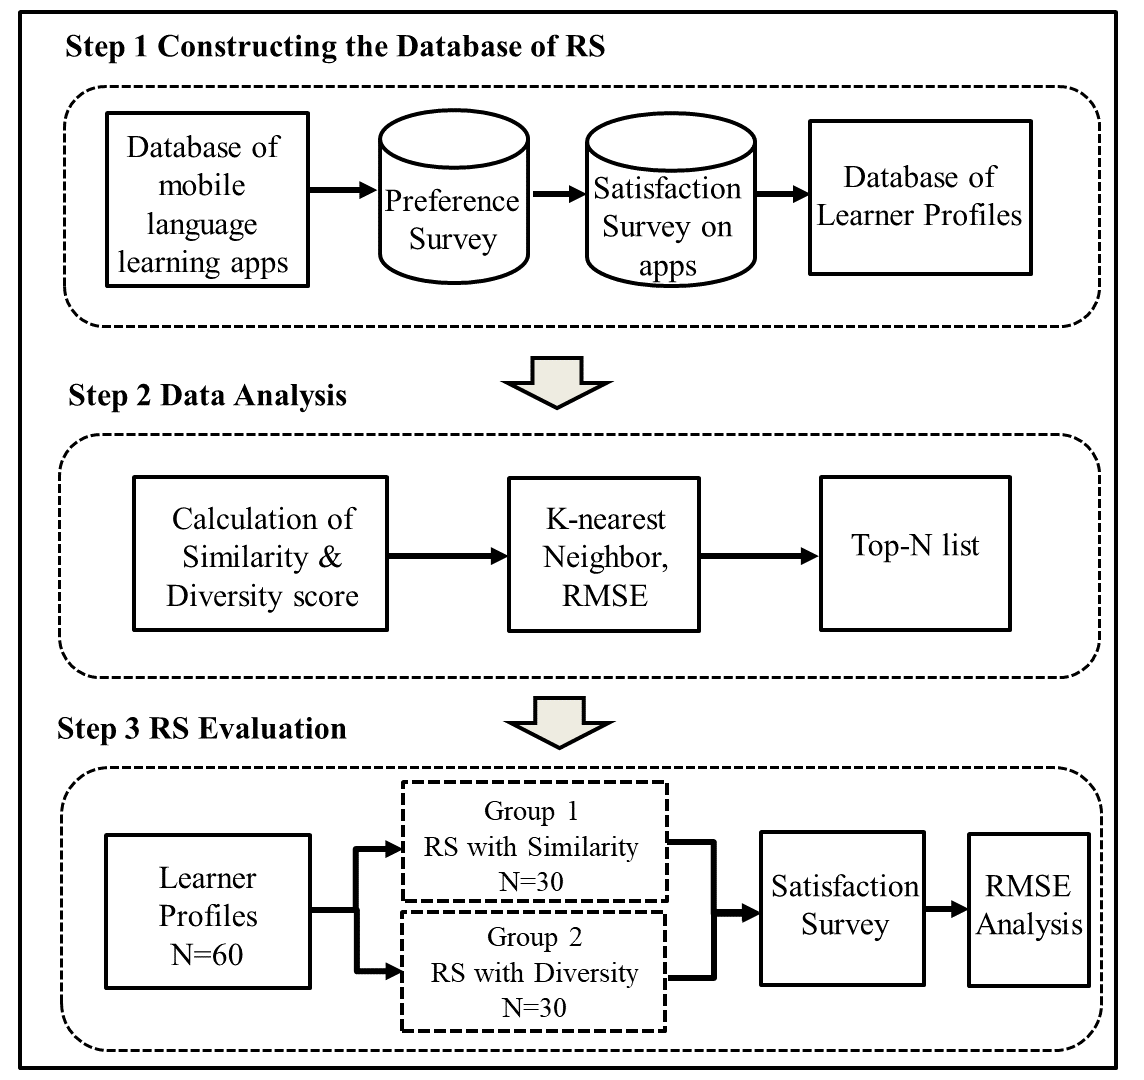 To construct RS architecture, three steps were performed: Step 1: constructing the database of RS, Step 2: data analysis, and Step 3: RS evaluation.